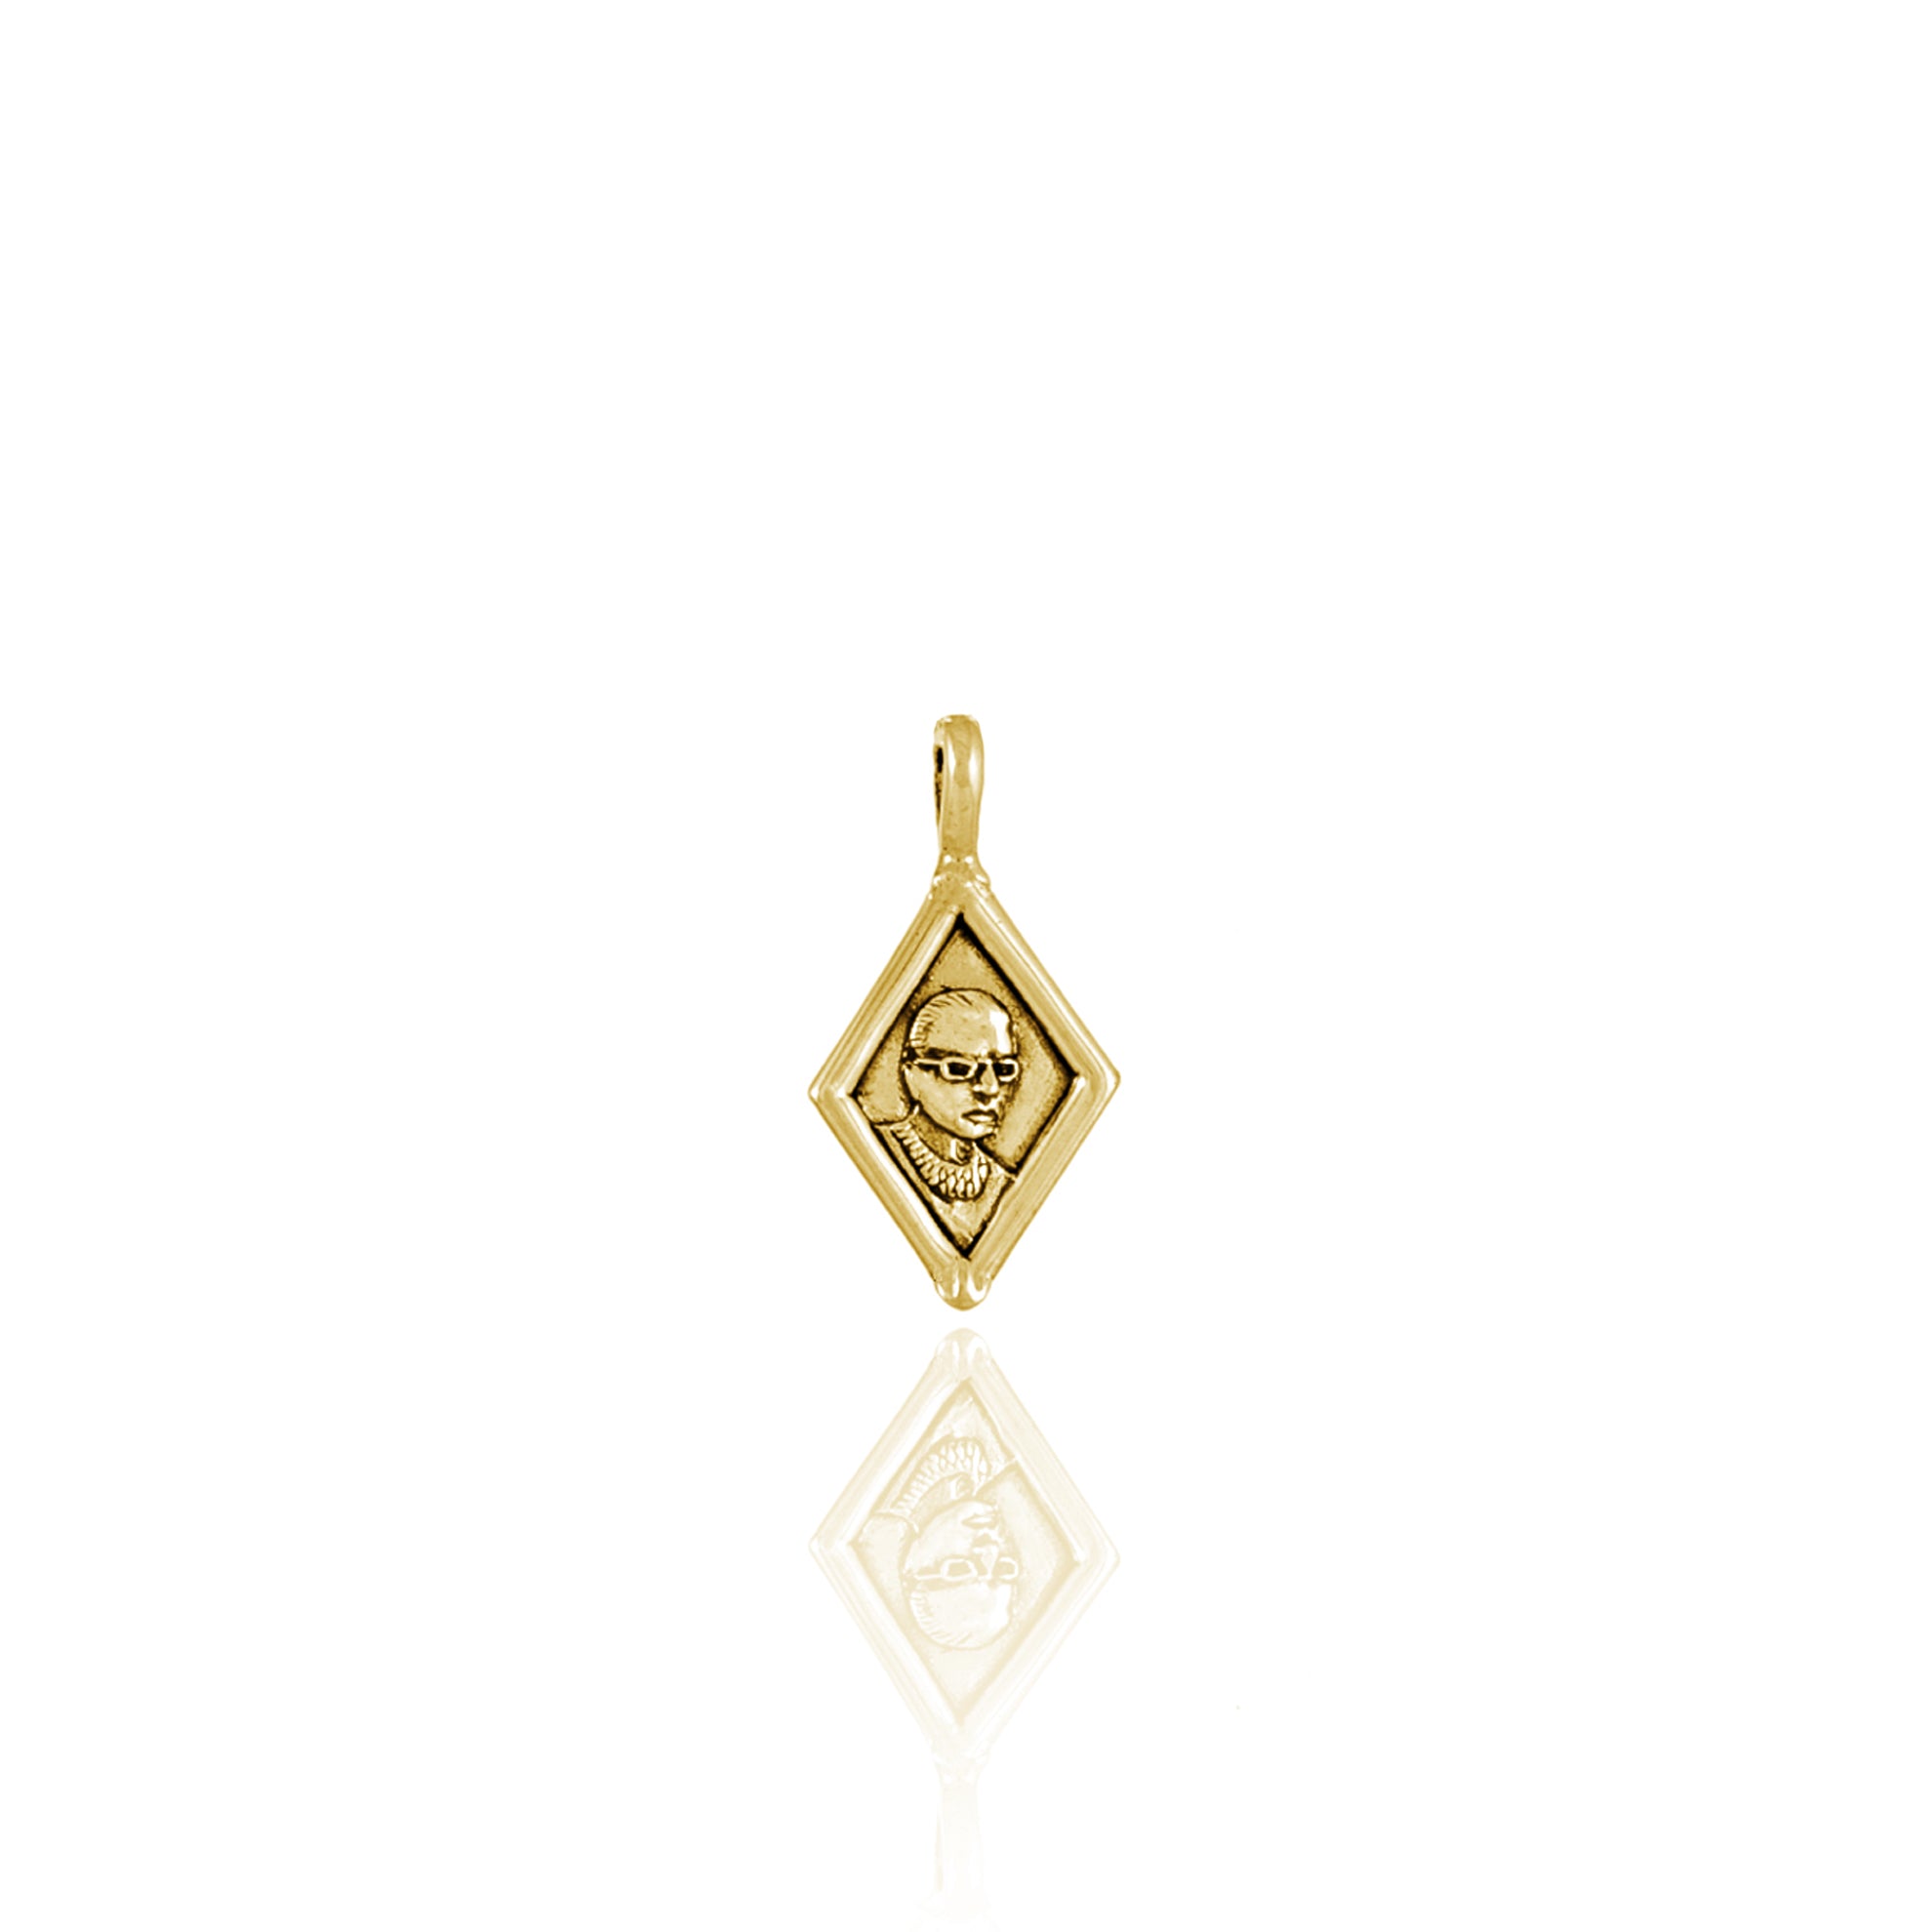 Ruth Bader Ginsberg Pendant for Equality - CHARM ONLY - Gold